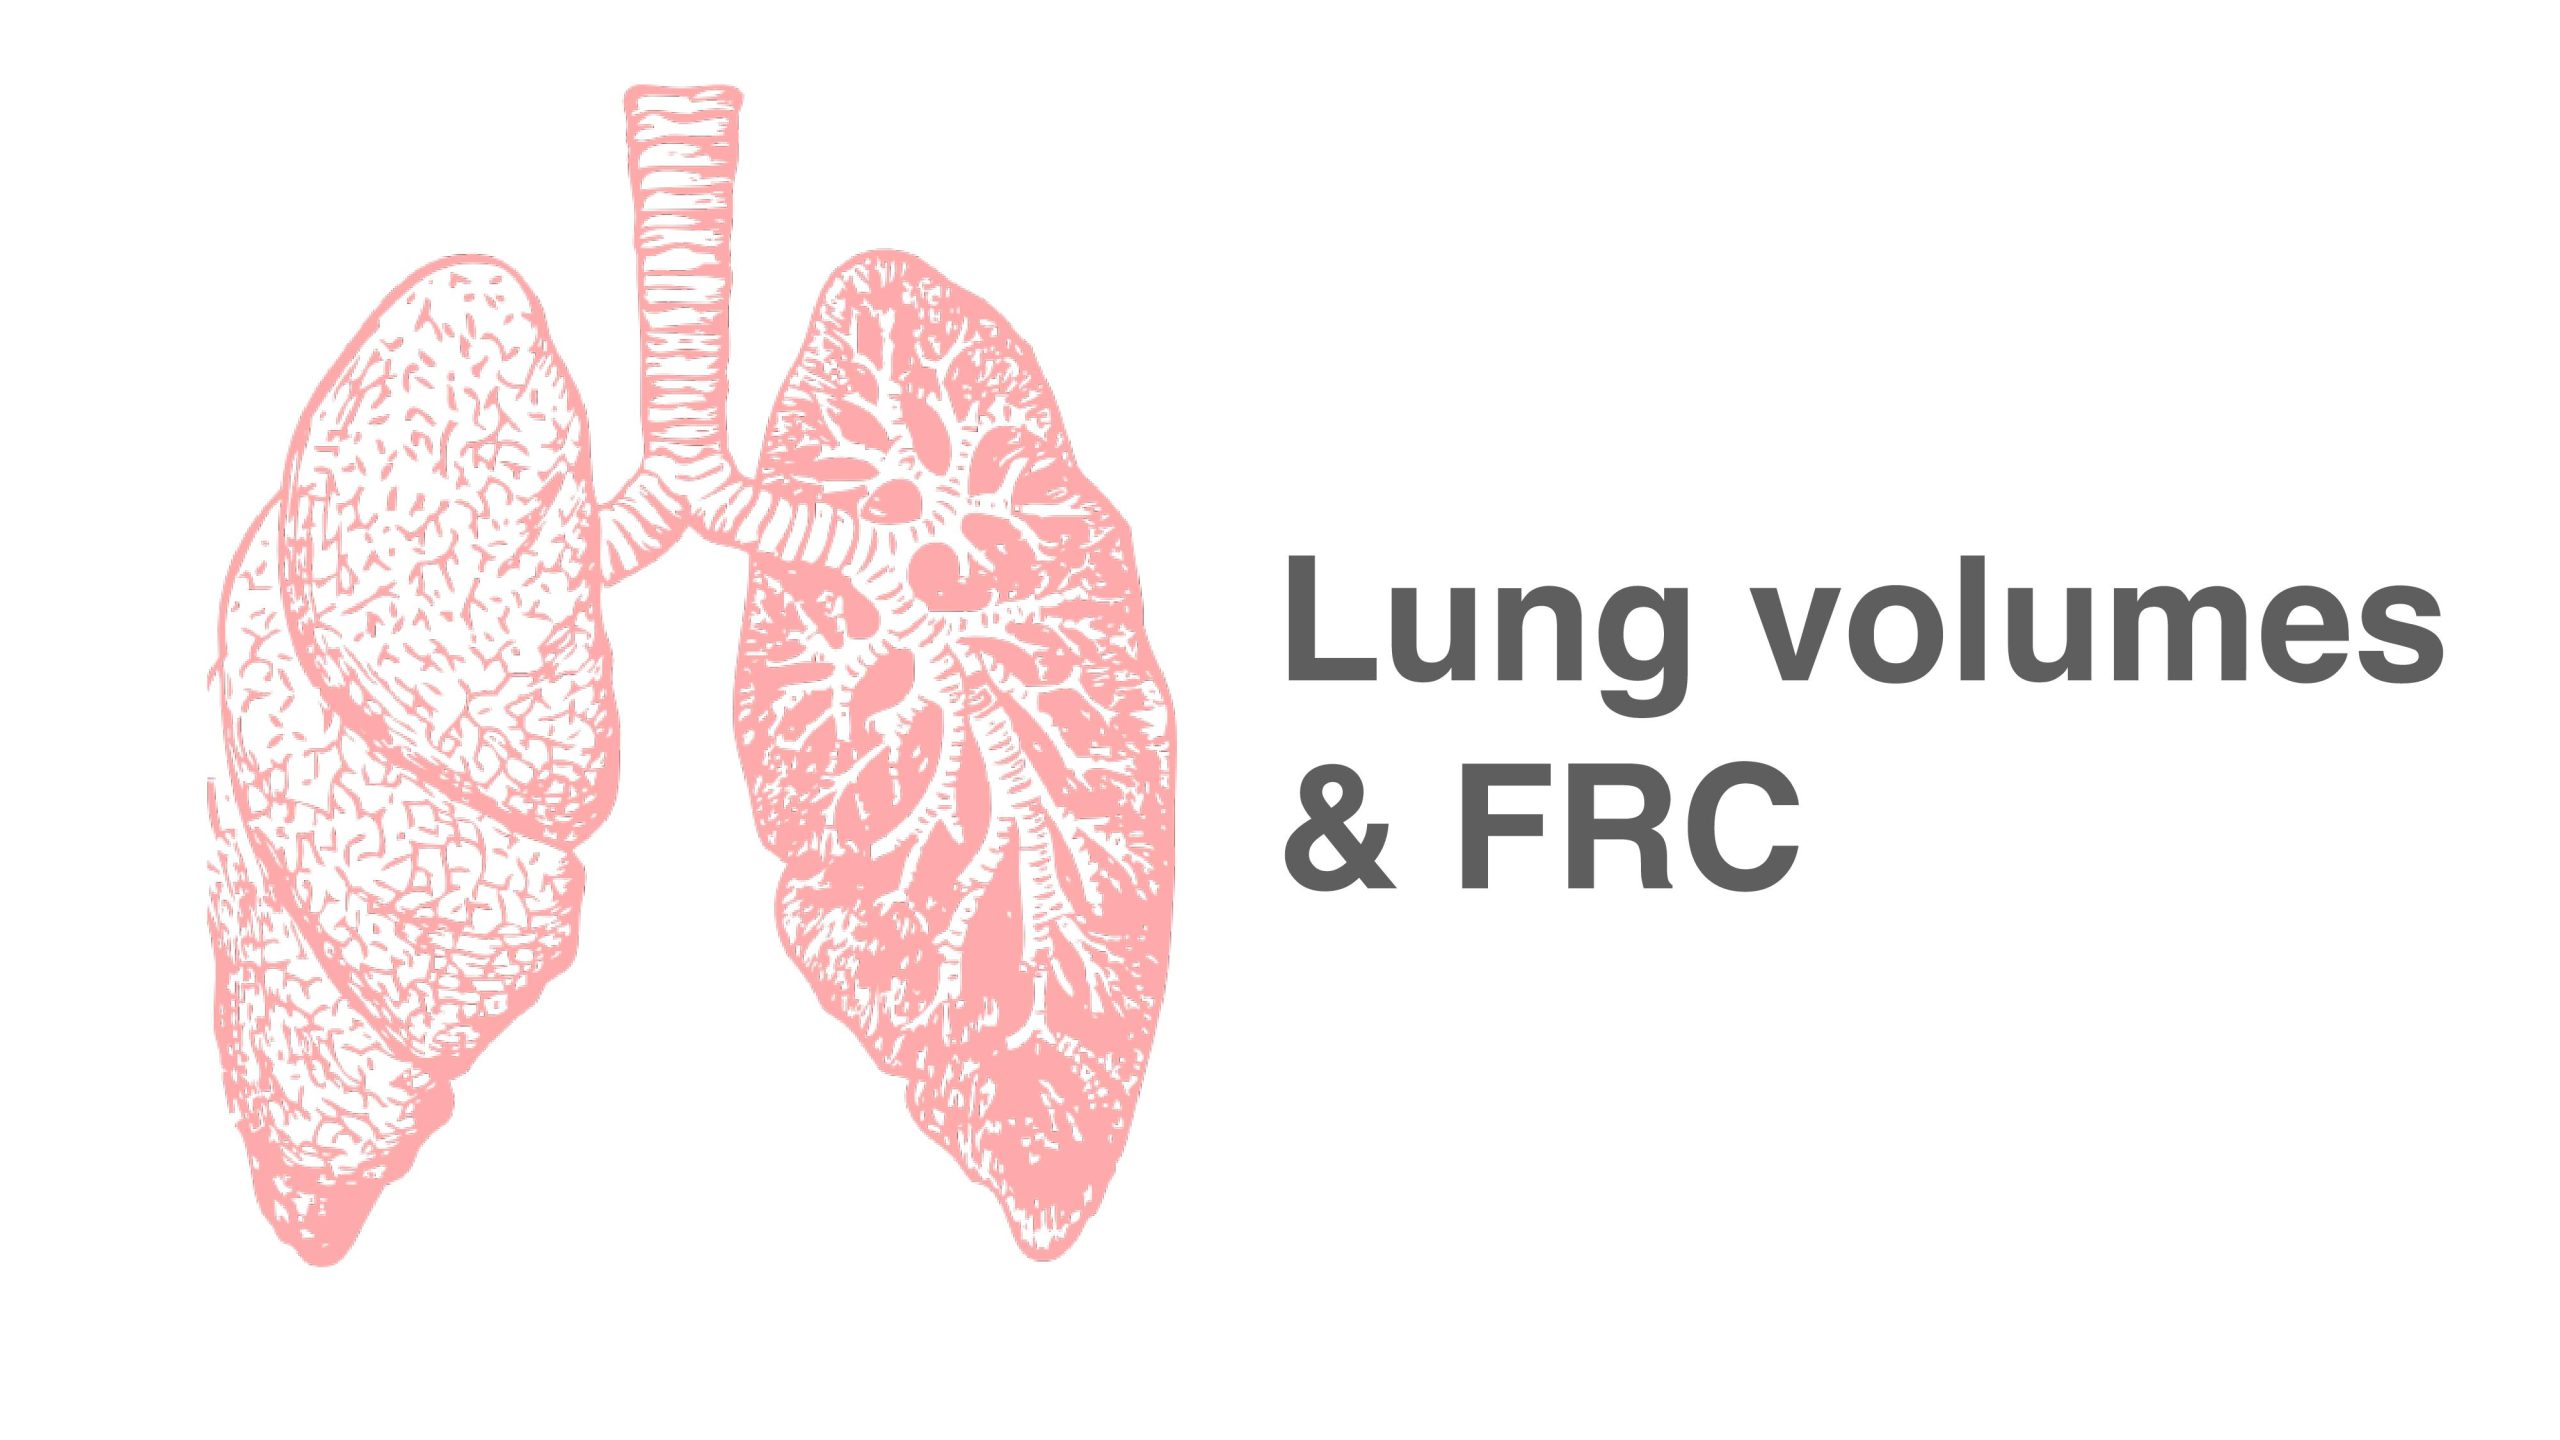 3. Lung Volumes and FRC